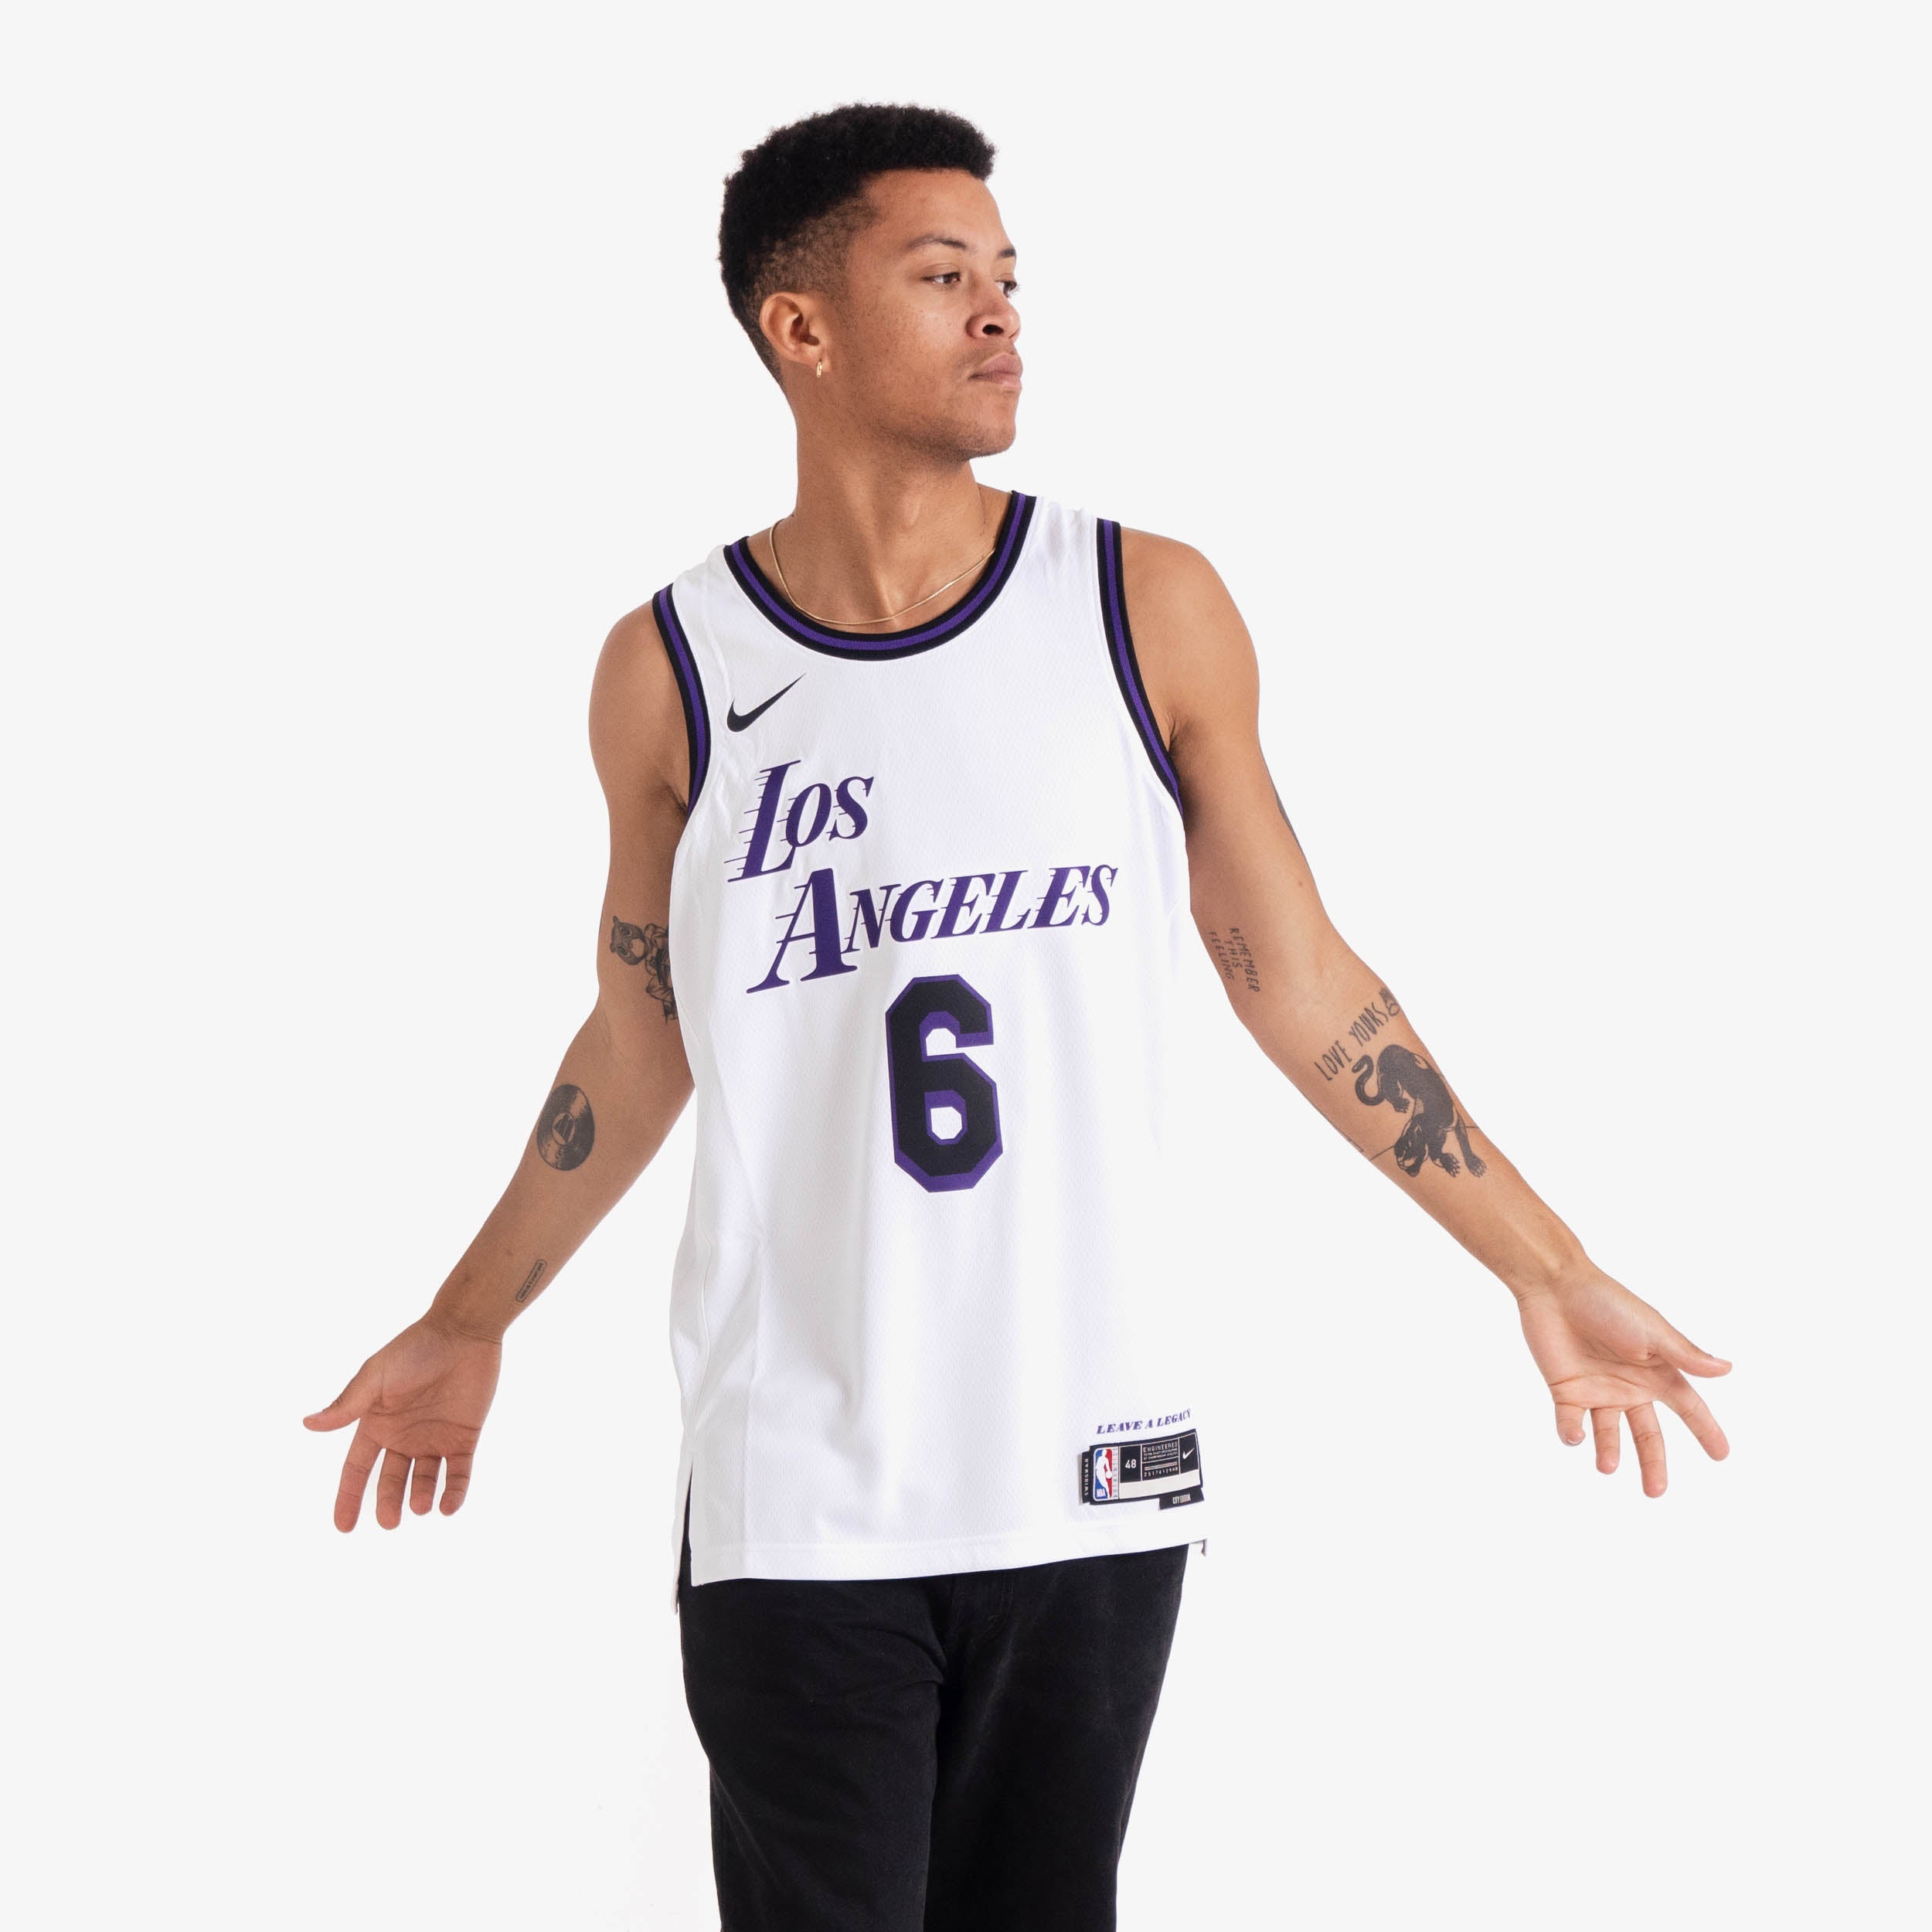 city jersey lakers